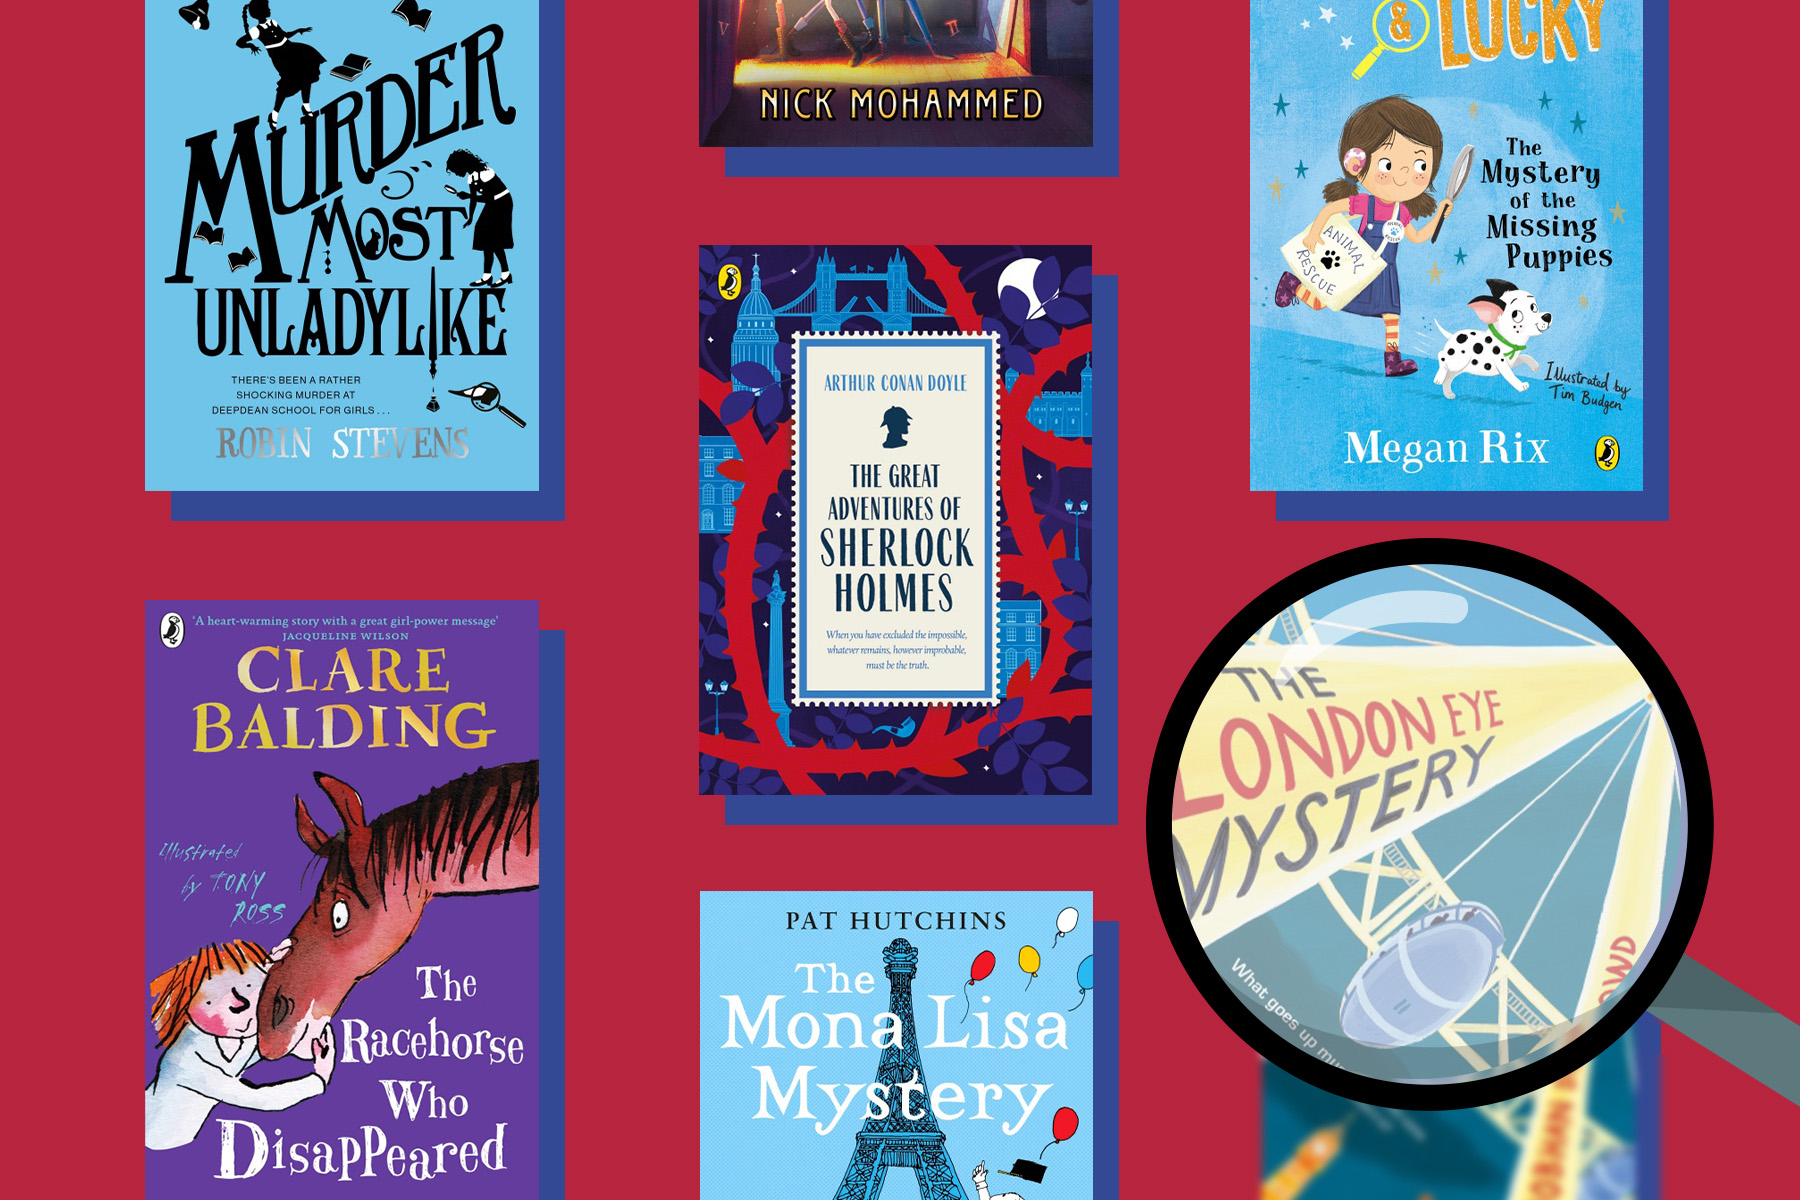 A photo of a selection of children's crime books on a red background with a magnifying glass hovering over the book The London Mystery by Siobhan Dowd